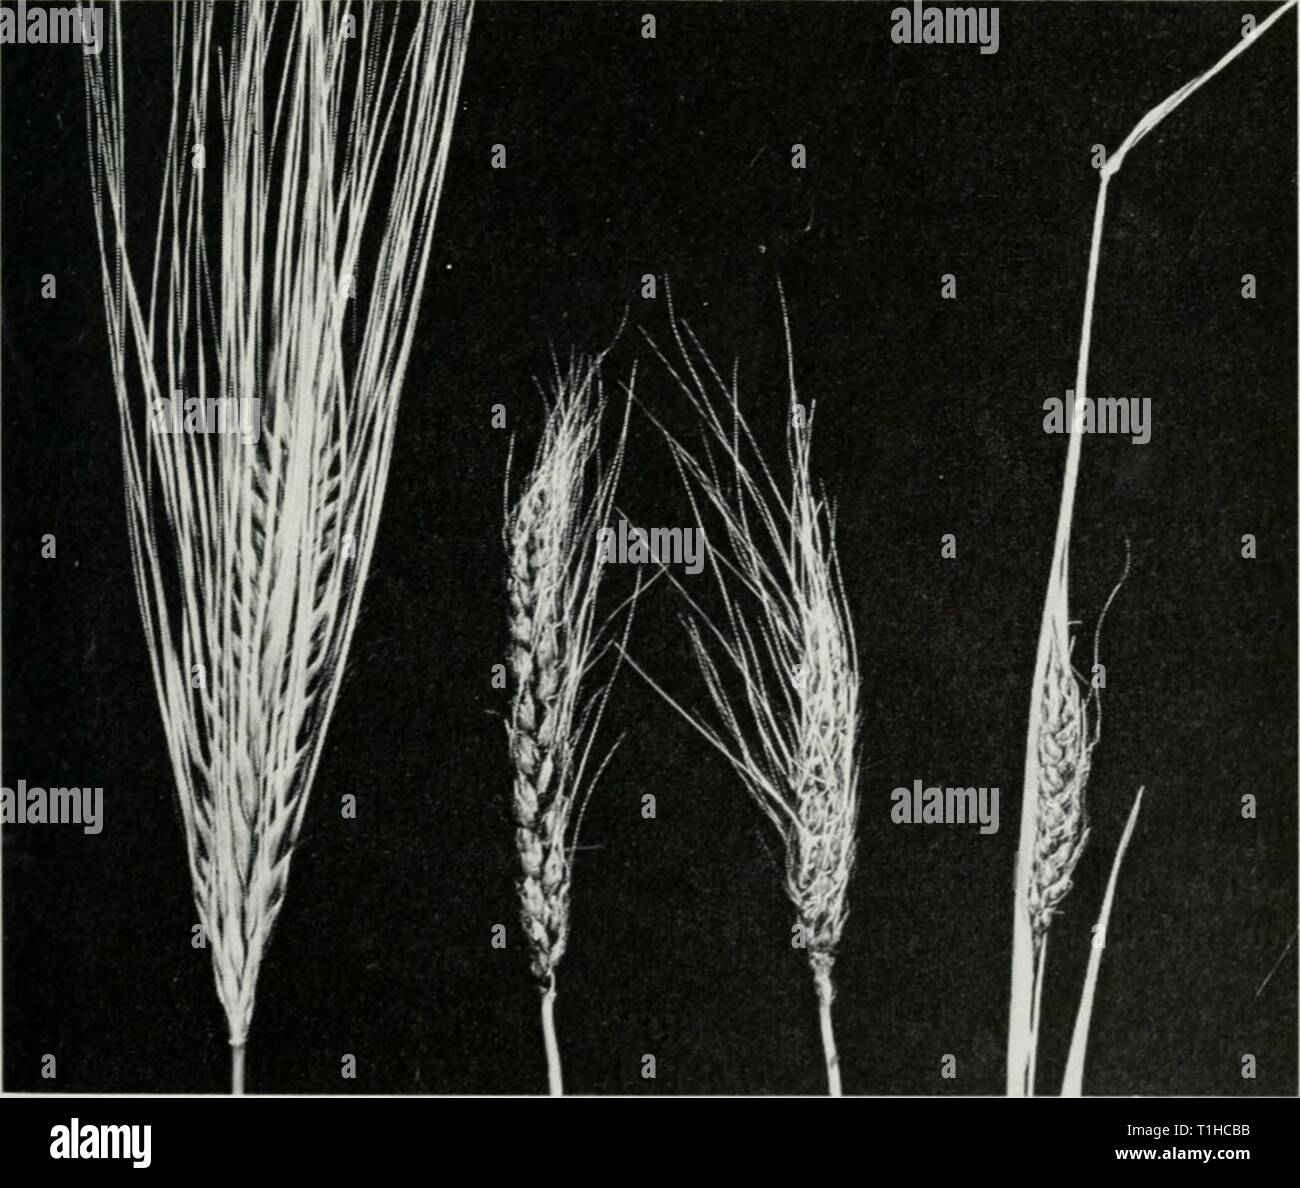 Diseases of wheat, oats, barley, Diseases of wheat, oats, barley, and rye  diseasesofwheato48boew Year: 1960  BOEWE: DISEASES OF WHEAT, OATS, BARLEY, AND RYE 99 COVERED SMUT Ustilago hordei The fungus causing covered smut of barley does not infect any other cereal. It occurs on 11 wild grasses west of Illinois, but it has not been found on them in Illinois. In symptoms and life history it is similar to the fungus causing covered smut of oats. There are at least seven physiologic races of the fungus that attacks barley. Covered smut occurs on barley throughout Illinois, but it is most prevalent Stock Photo